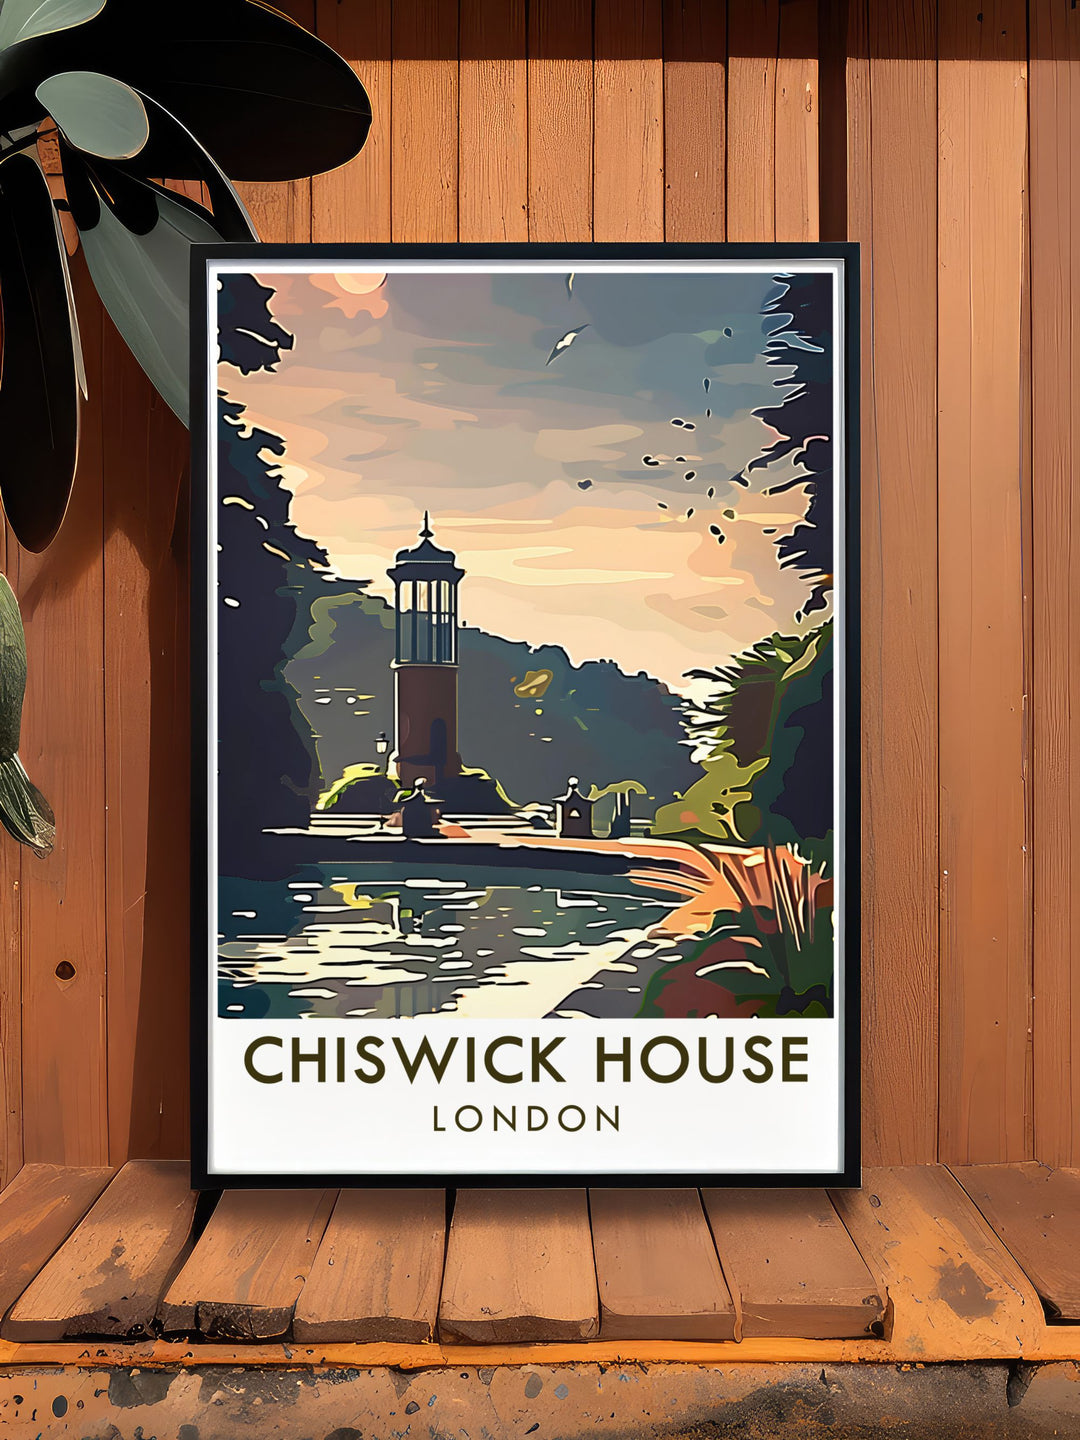 The Chiswick House Gardens, featuring hidden groves and charming garden buildings, provide a picturesque setting for relaxation and contemplation.